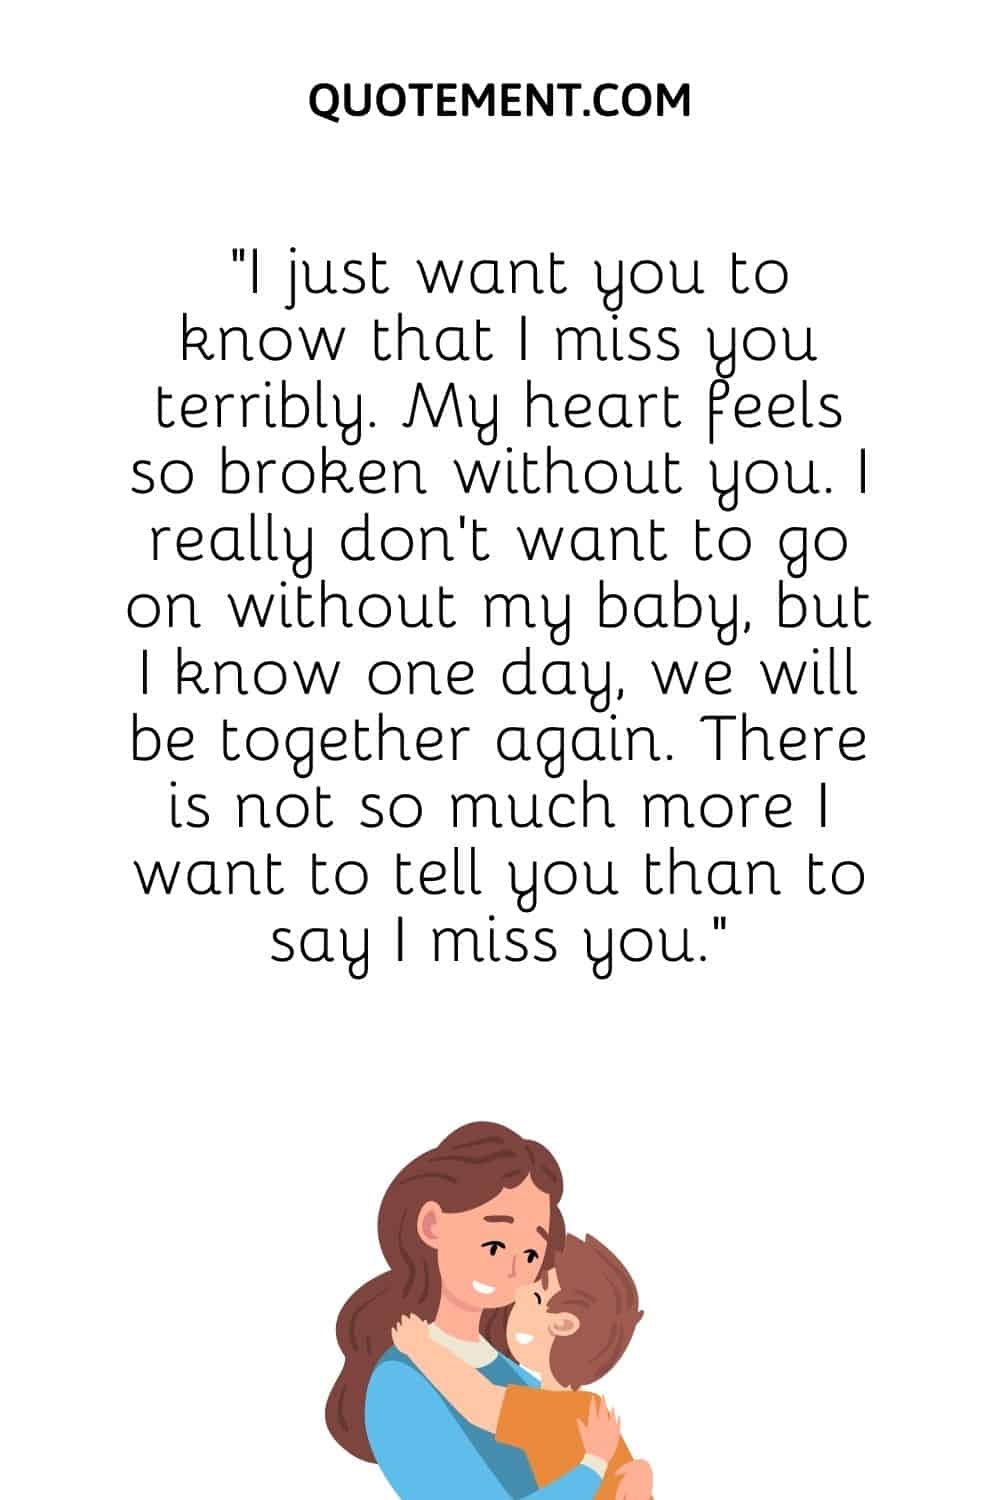 I just want you to know that I miss you terribly.